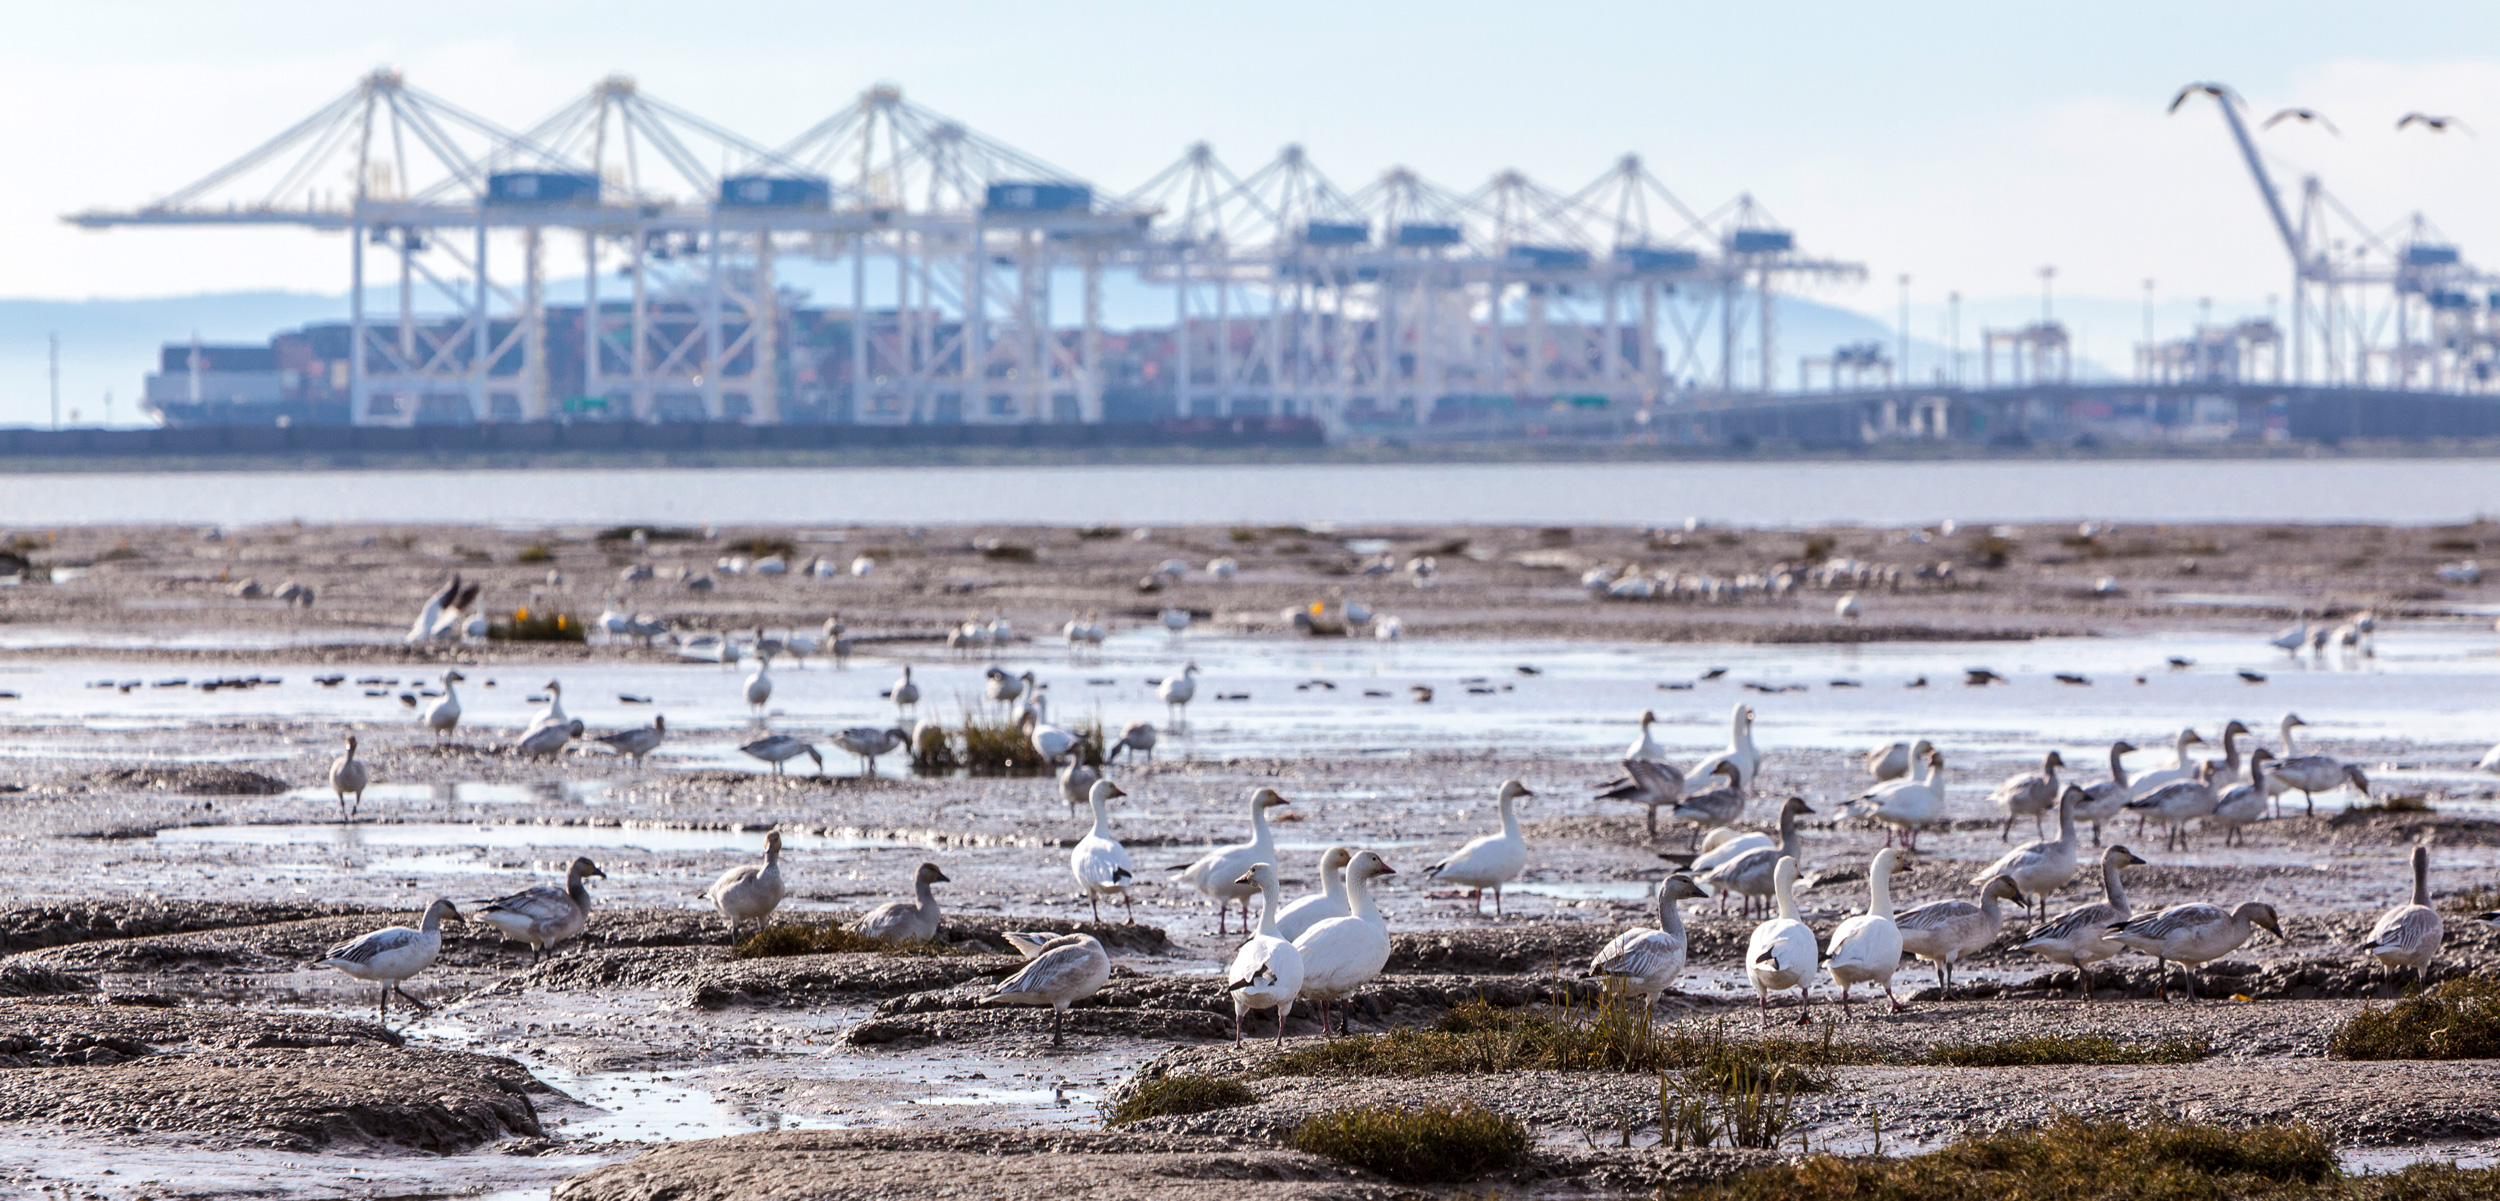 Migratory shorebirds feed on the mudflats along British Columbia’s Roberts Bank, near Canada’s largest container terminal, Deltaport. A proposed expansion to Deltaport, known as Terminal 2, would double the facility’s size. The plans have triggered a contentious environmental assessment to determine whether the proposed development is likely to have “significant adverse effects” on the environment. Photo by Ron Watts